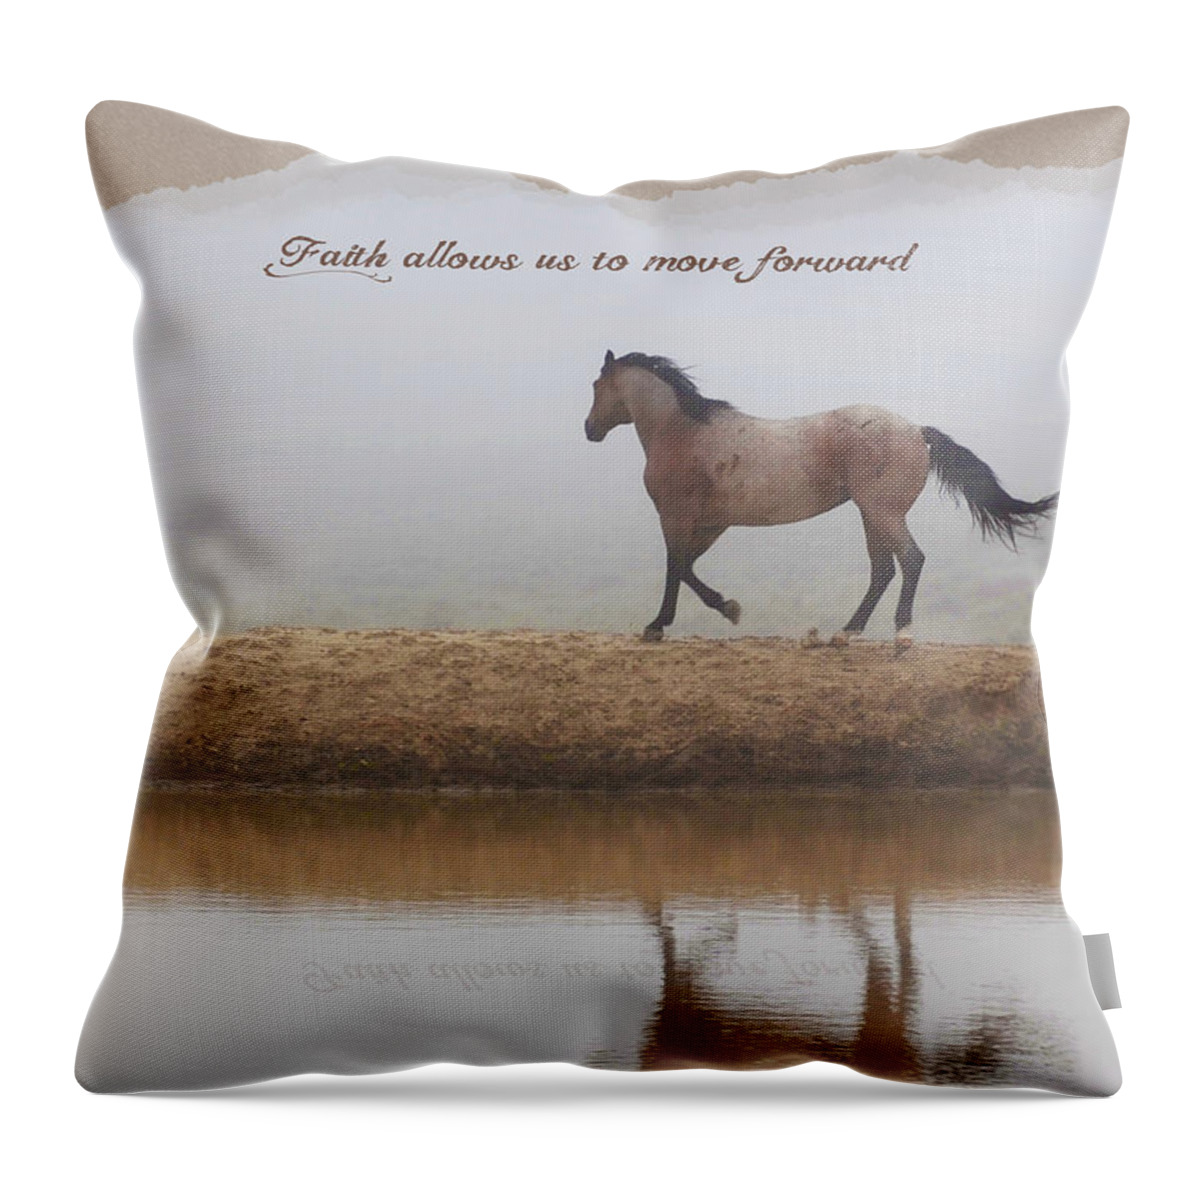 Inspirational Throw Pillow featuring the photograph Mystical Beauty Inspirational by Amanda Smith